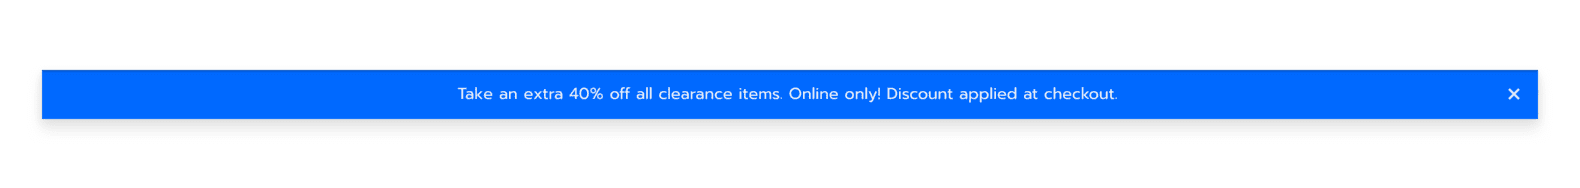 Alert bar: Take an extra 40% off all clearance items. Online only! Discount applied at checkout.